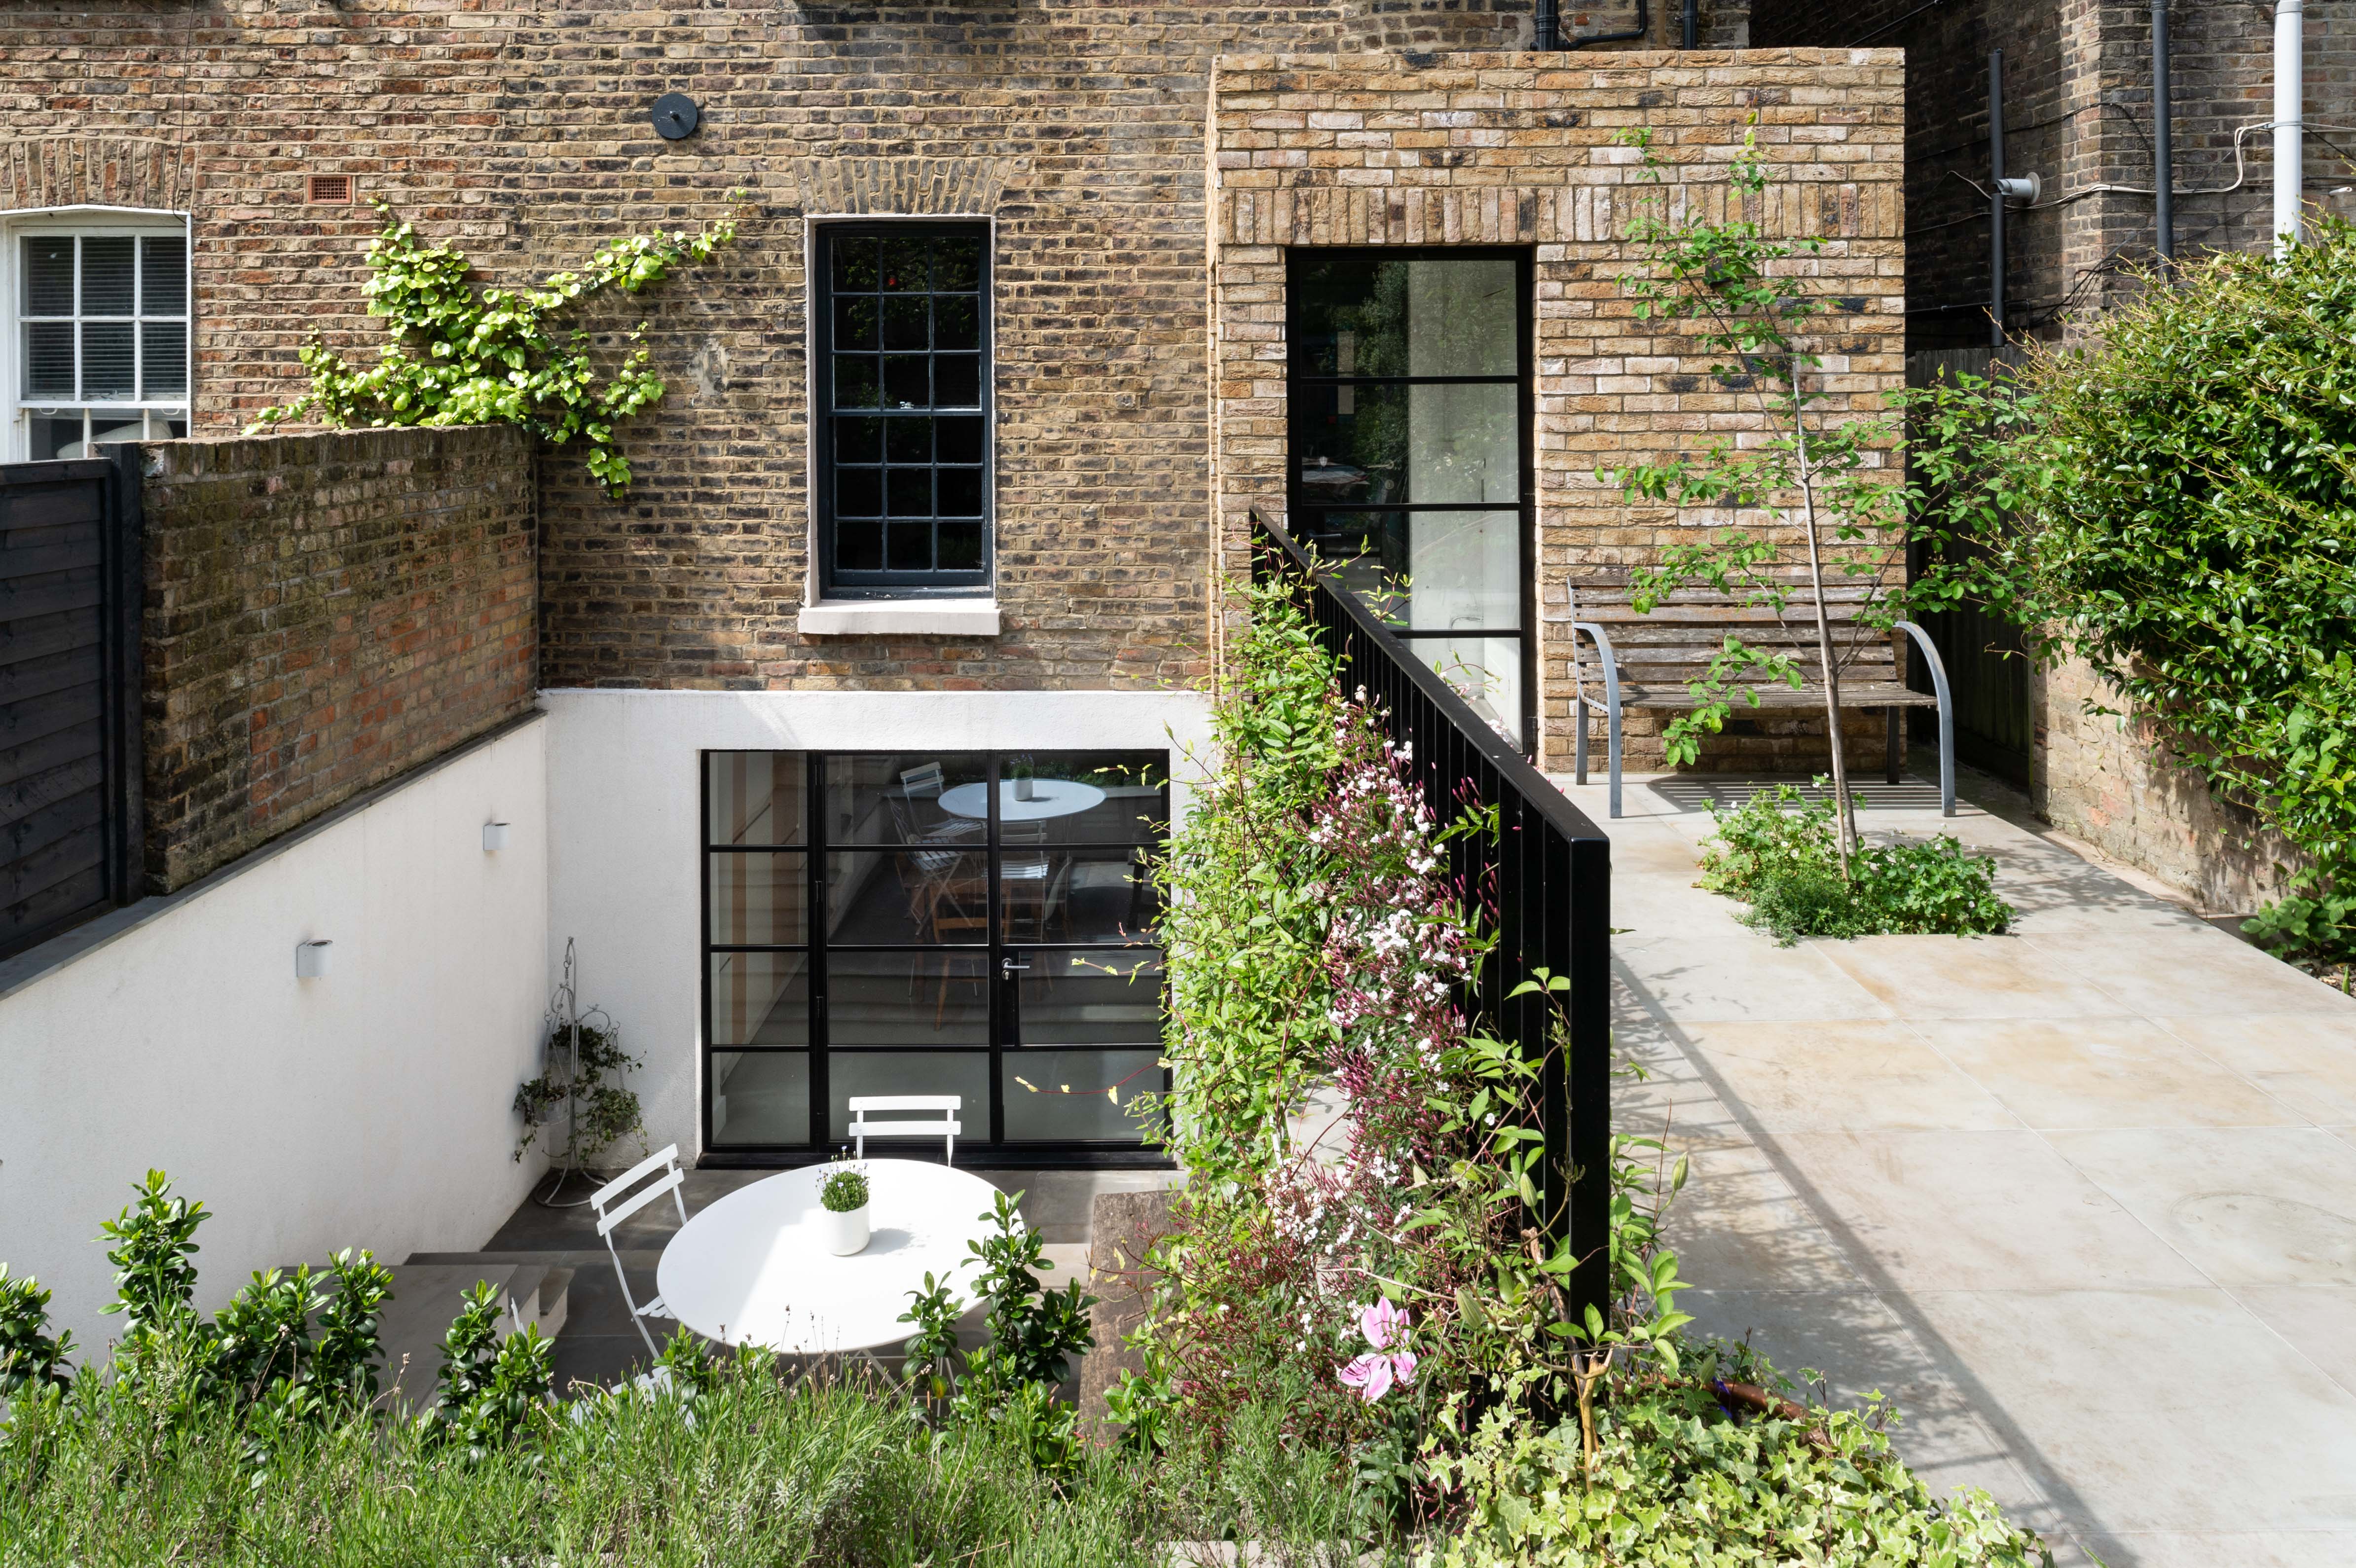 </p> <p>Find your ideal home design pro on designfor-me.com - get matched and see who's interested in your home project. Click image to see more inspiration from our design pros</p> <p>Design by James, architect from Hackney, London</p> <p>#architecture #homedesign #modernhomes #homeinspiration #extensions #extensiondesign #extensioninspiration #extensionideas #houseextension #slidingdoors </p> <p>